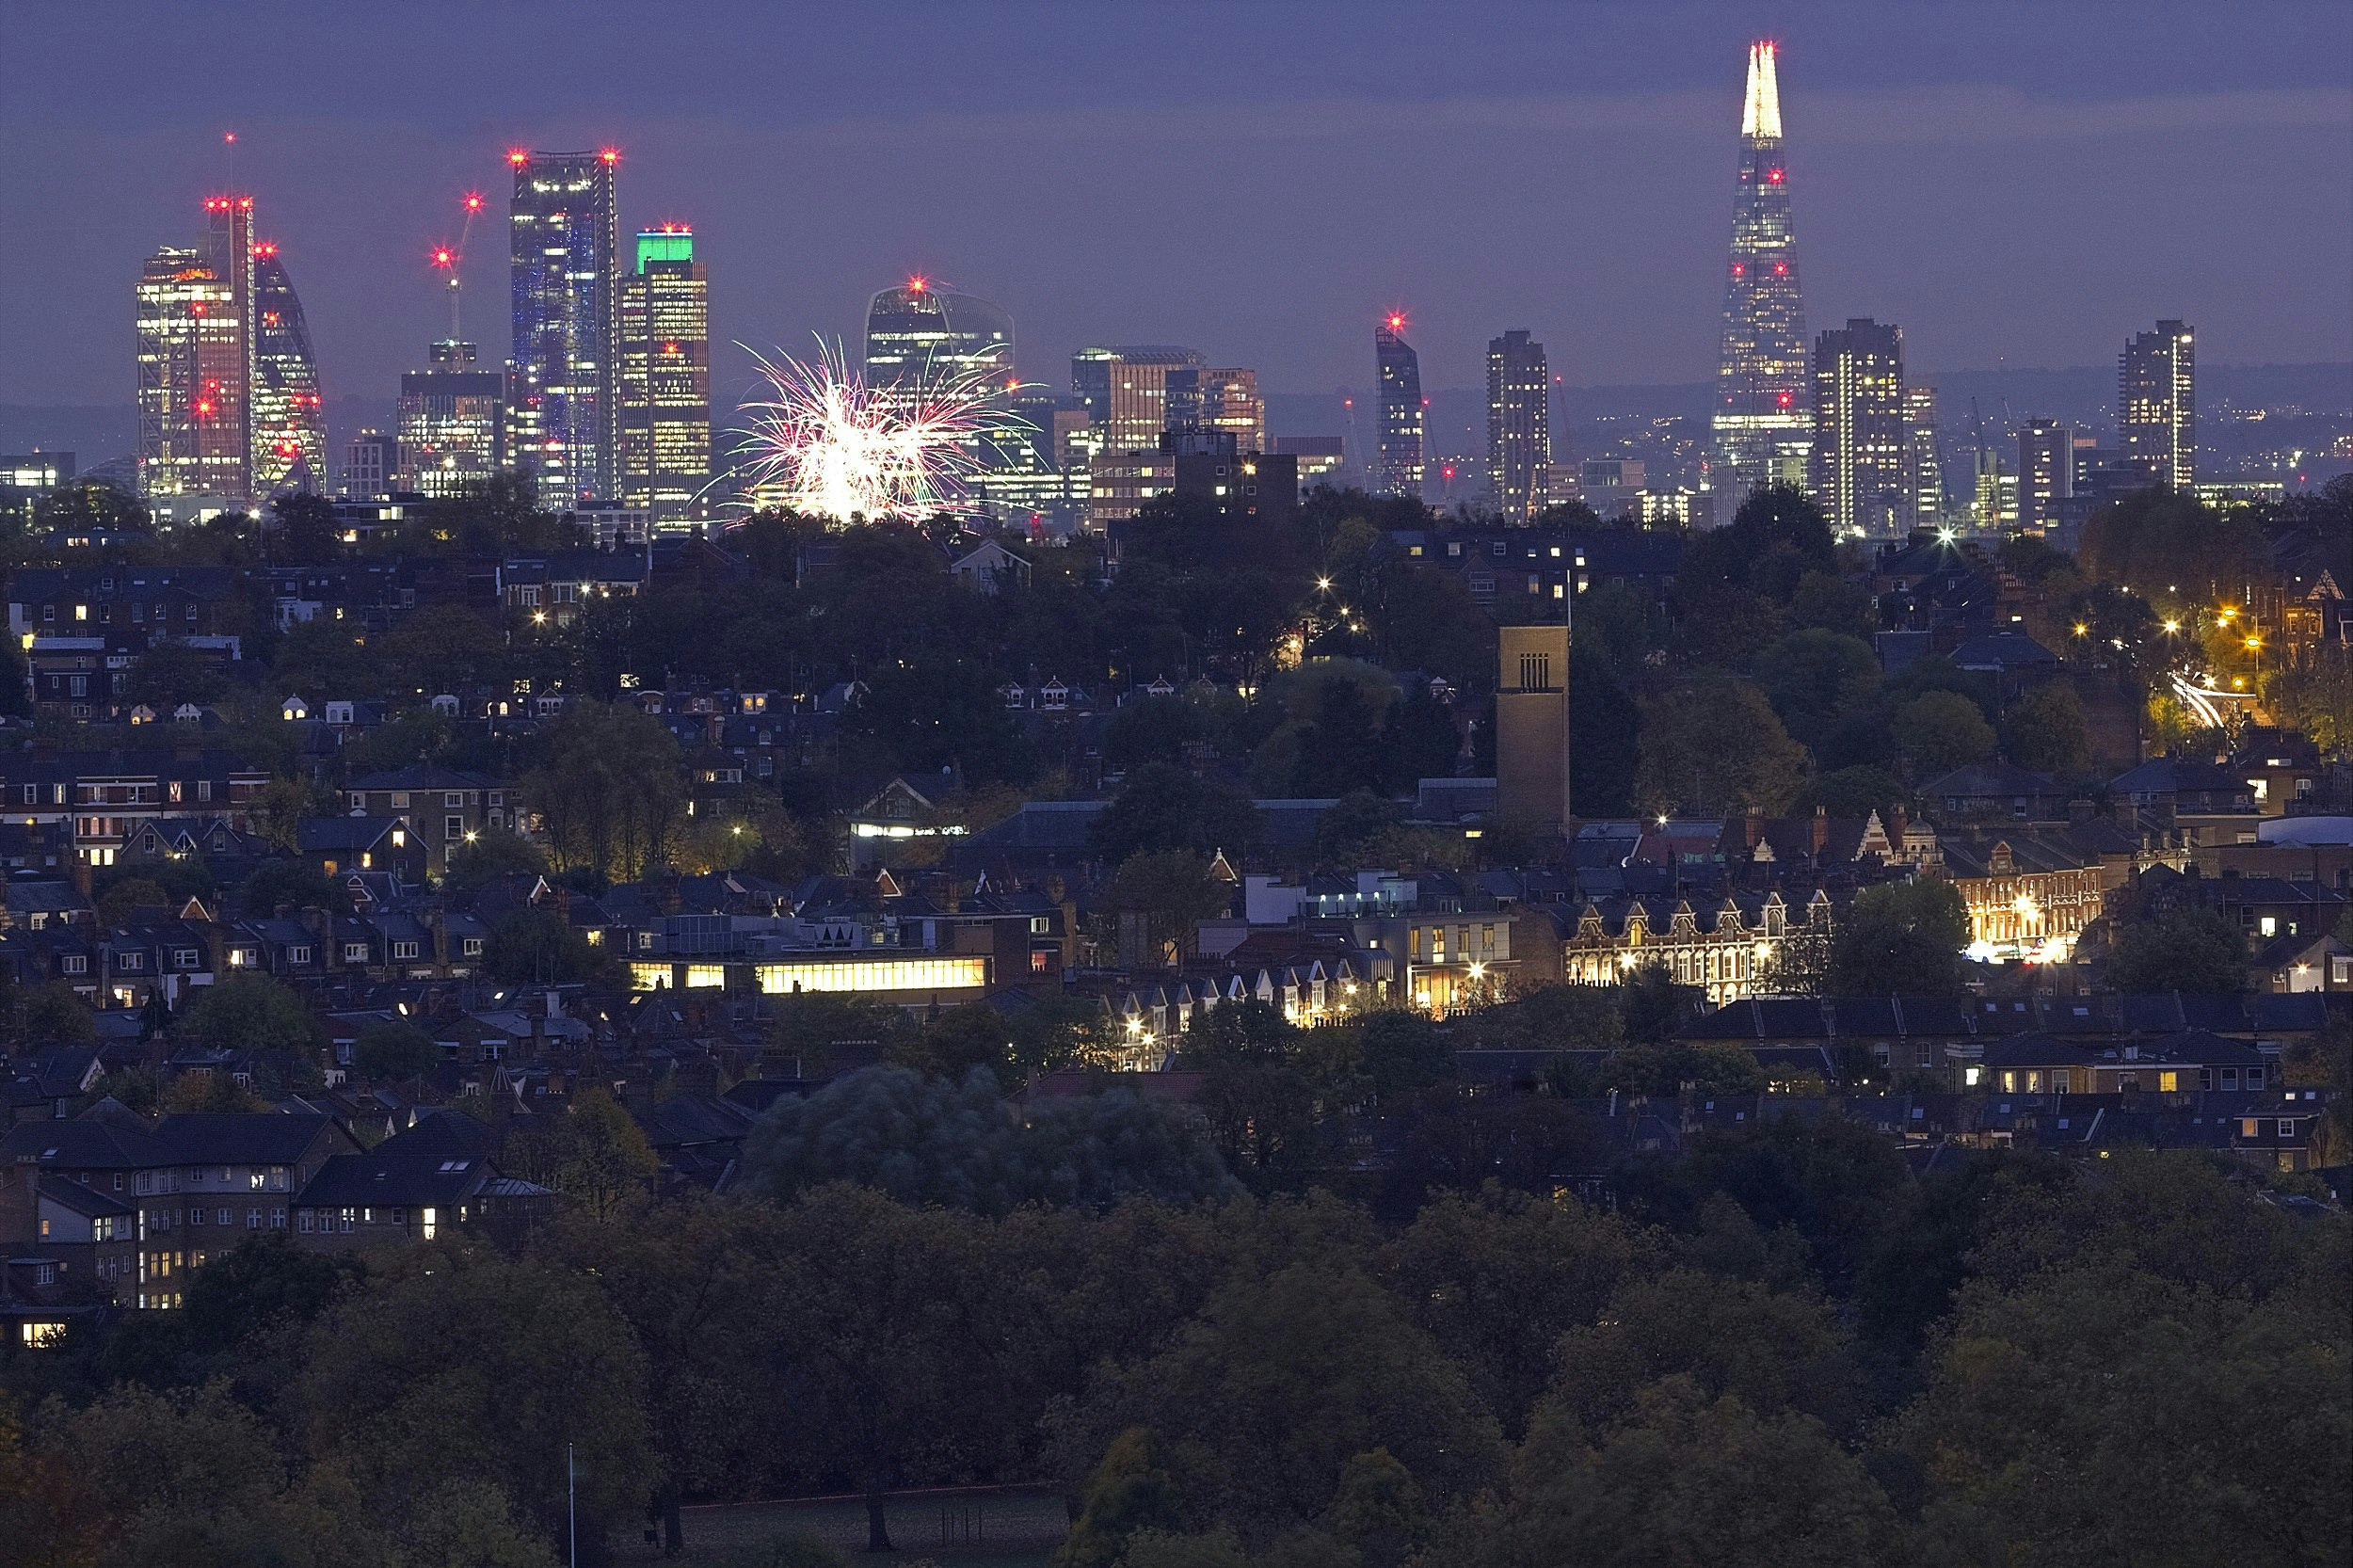 The view of London from Alexandra Palace. Residential streets in the foreground give way to London's skyscrapers at dusk, with some fireworks visible in the sky